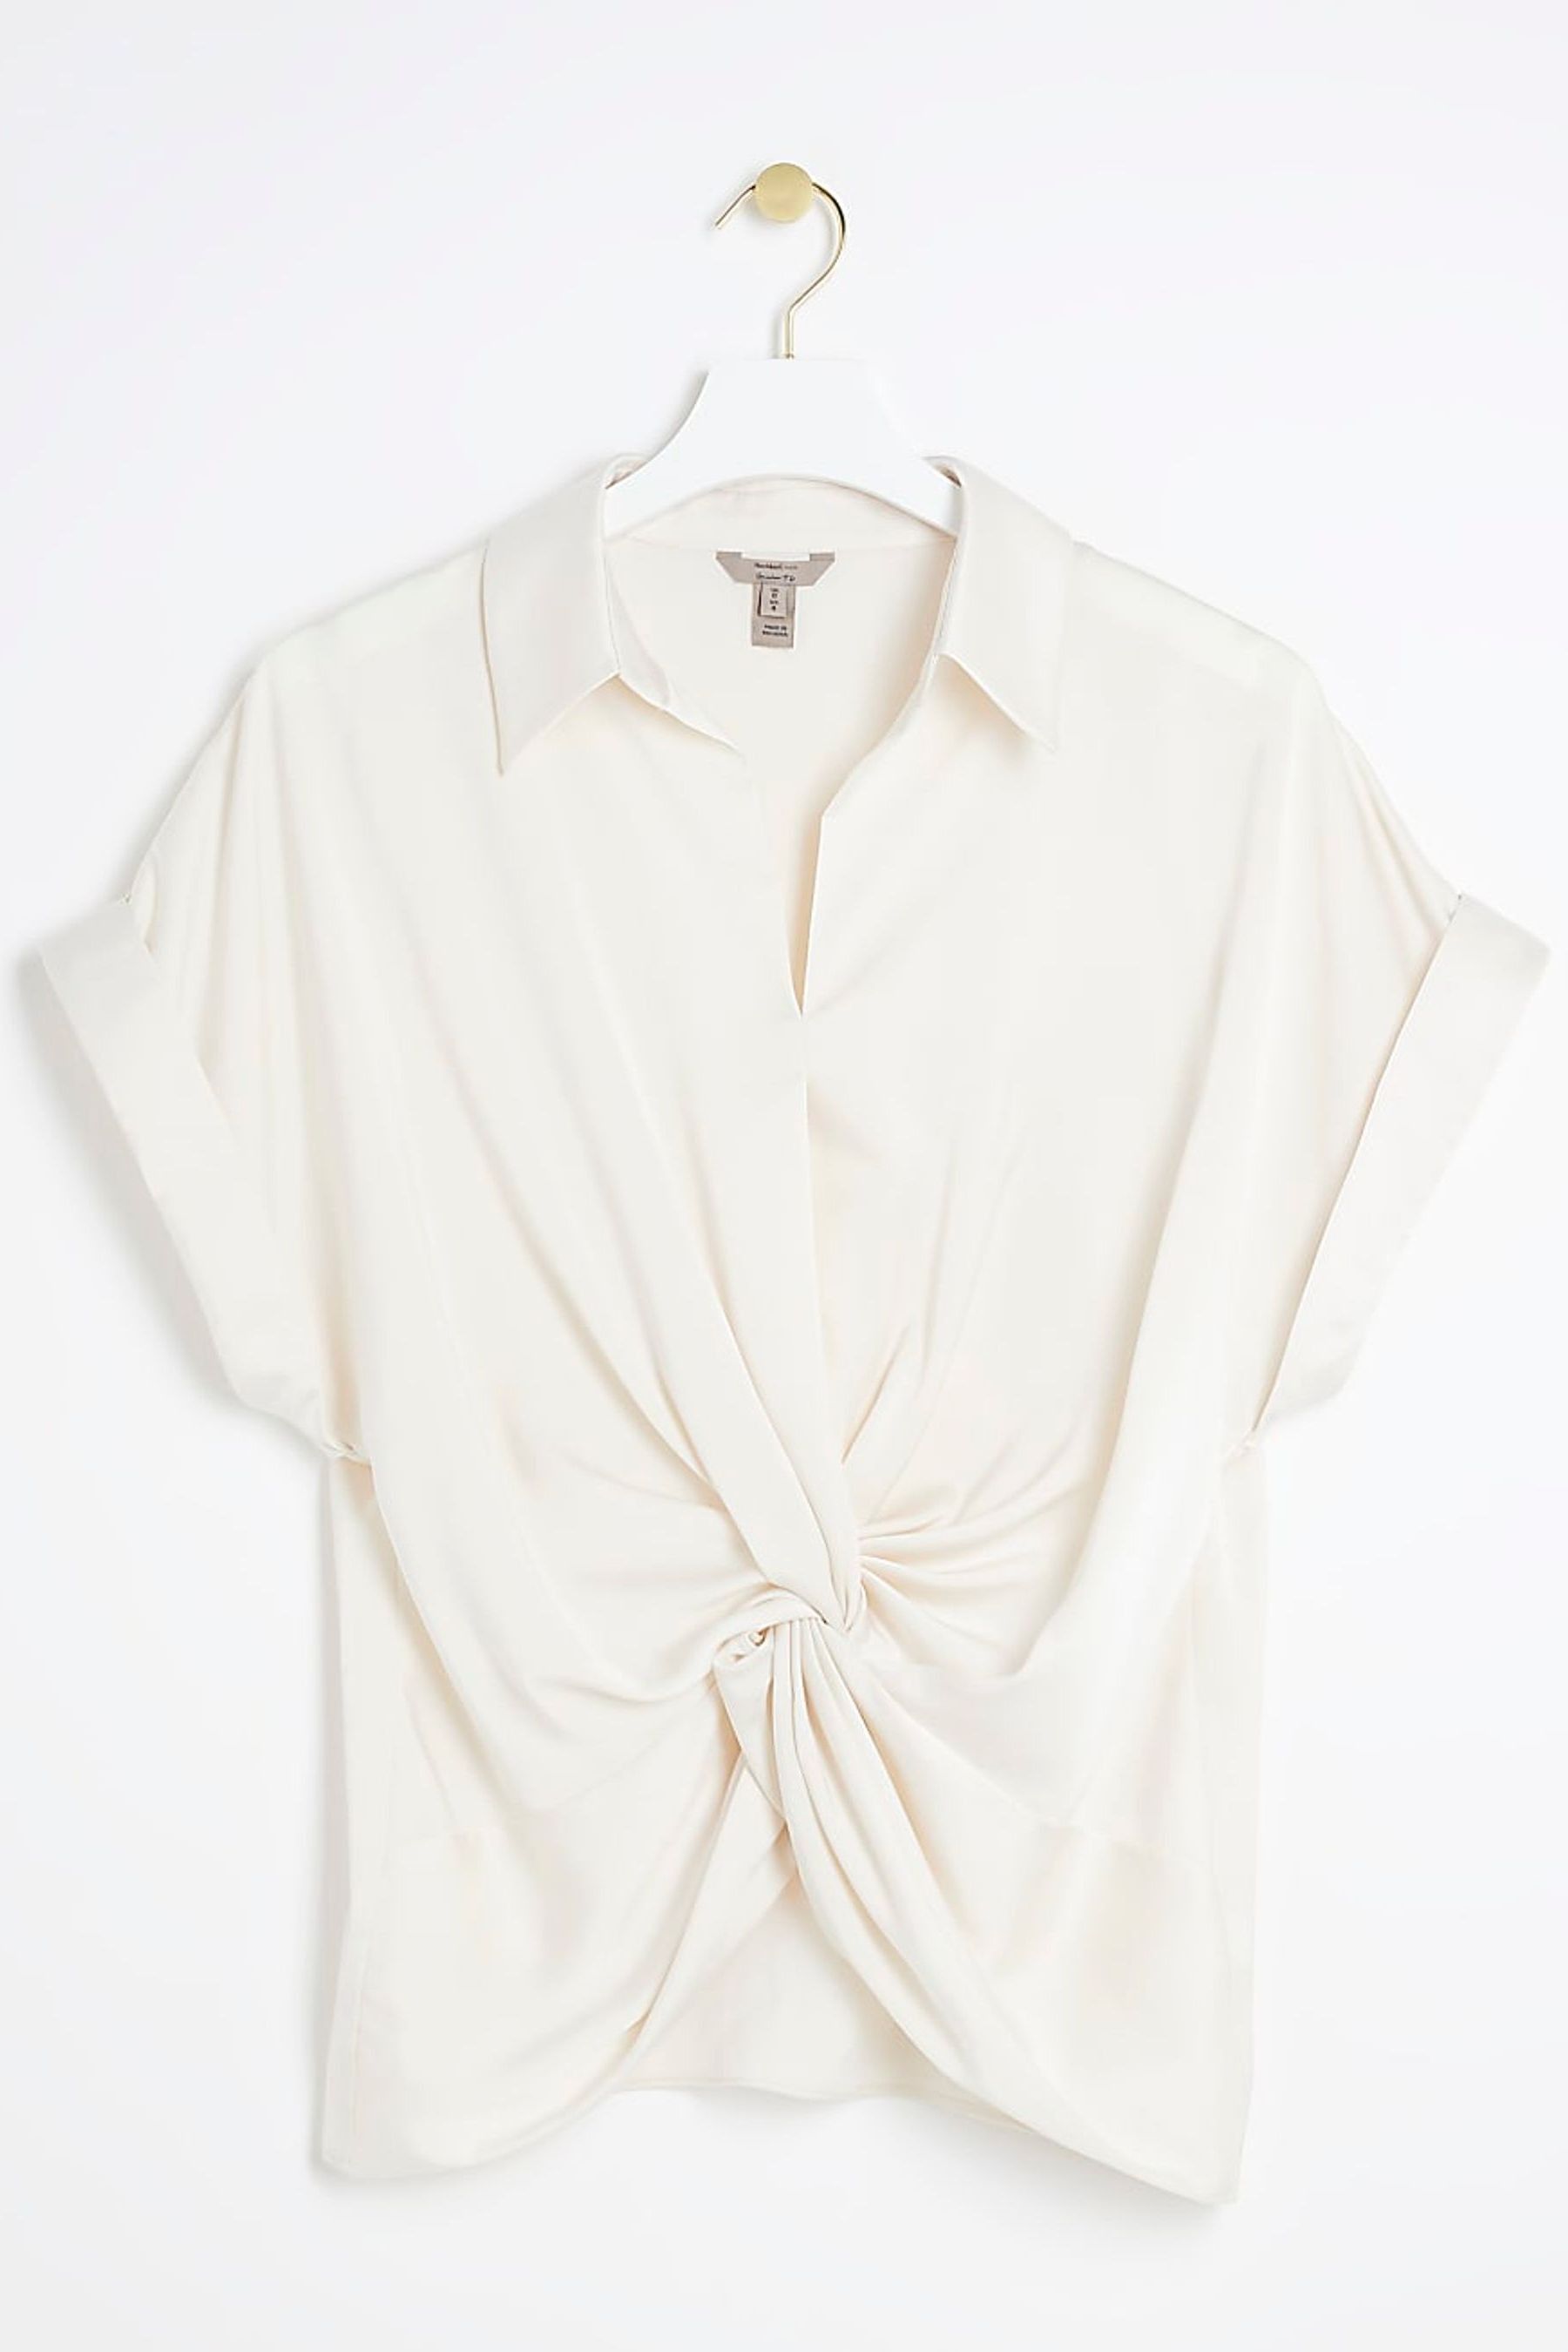 Buy River Island White Wrap Front Blouse from the Next UK online shop